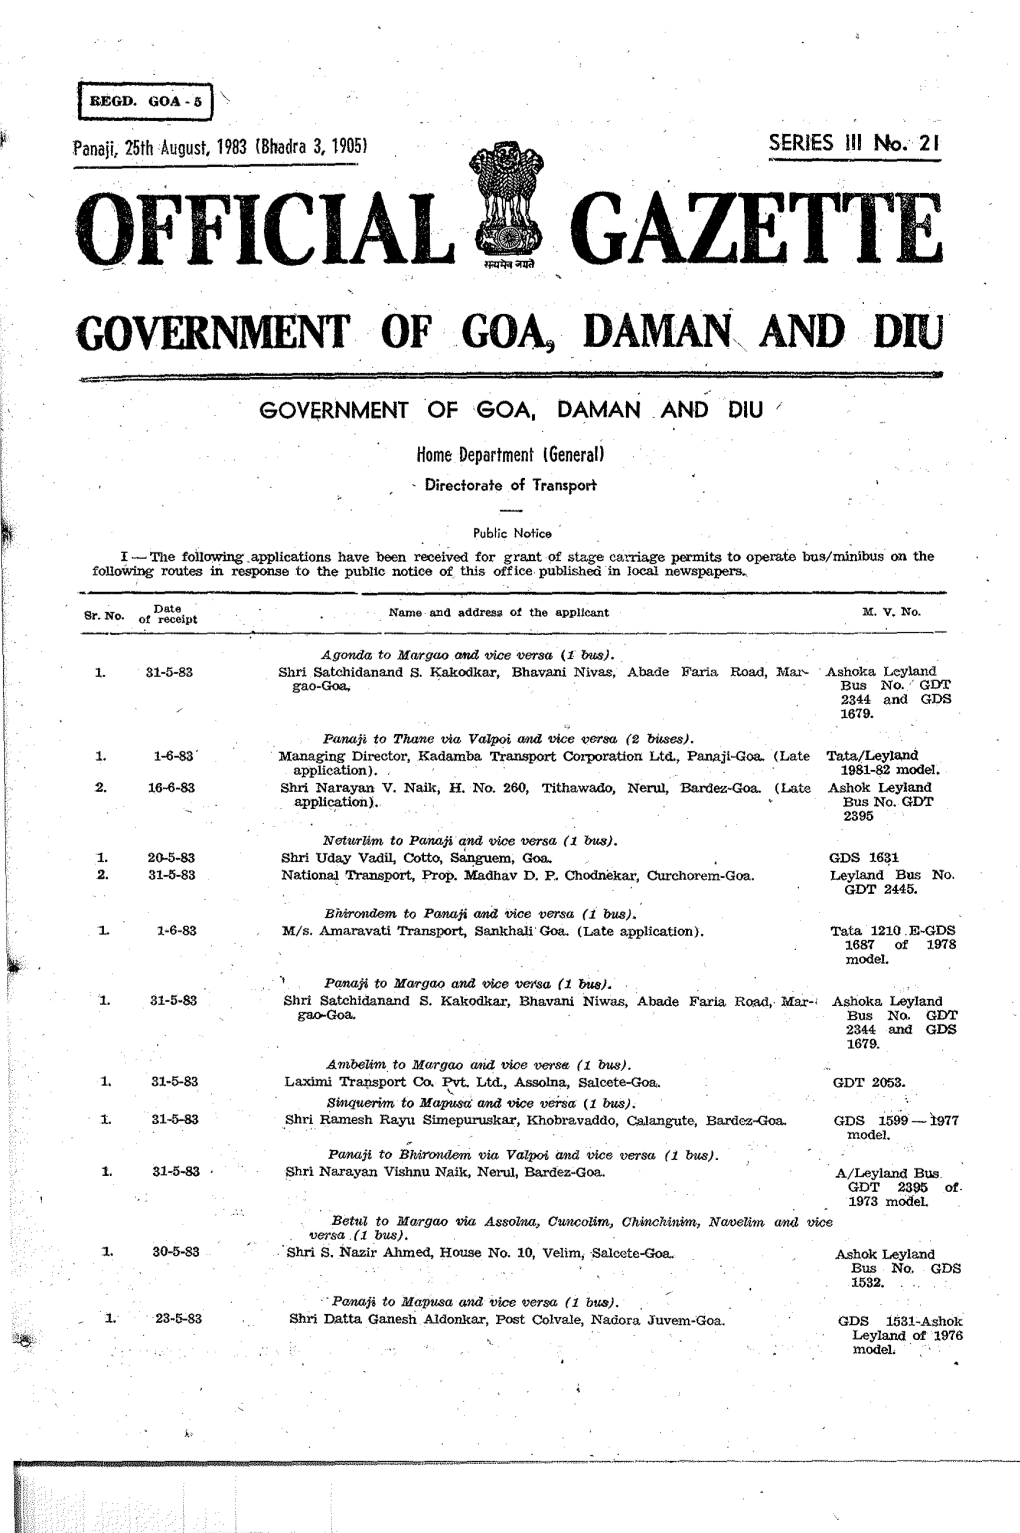 Official Gazette Government of